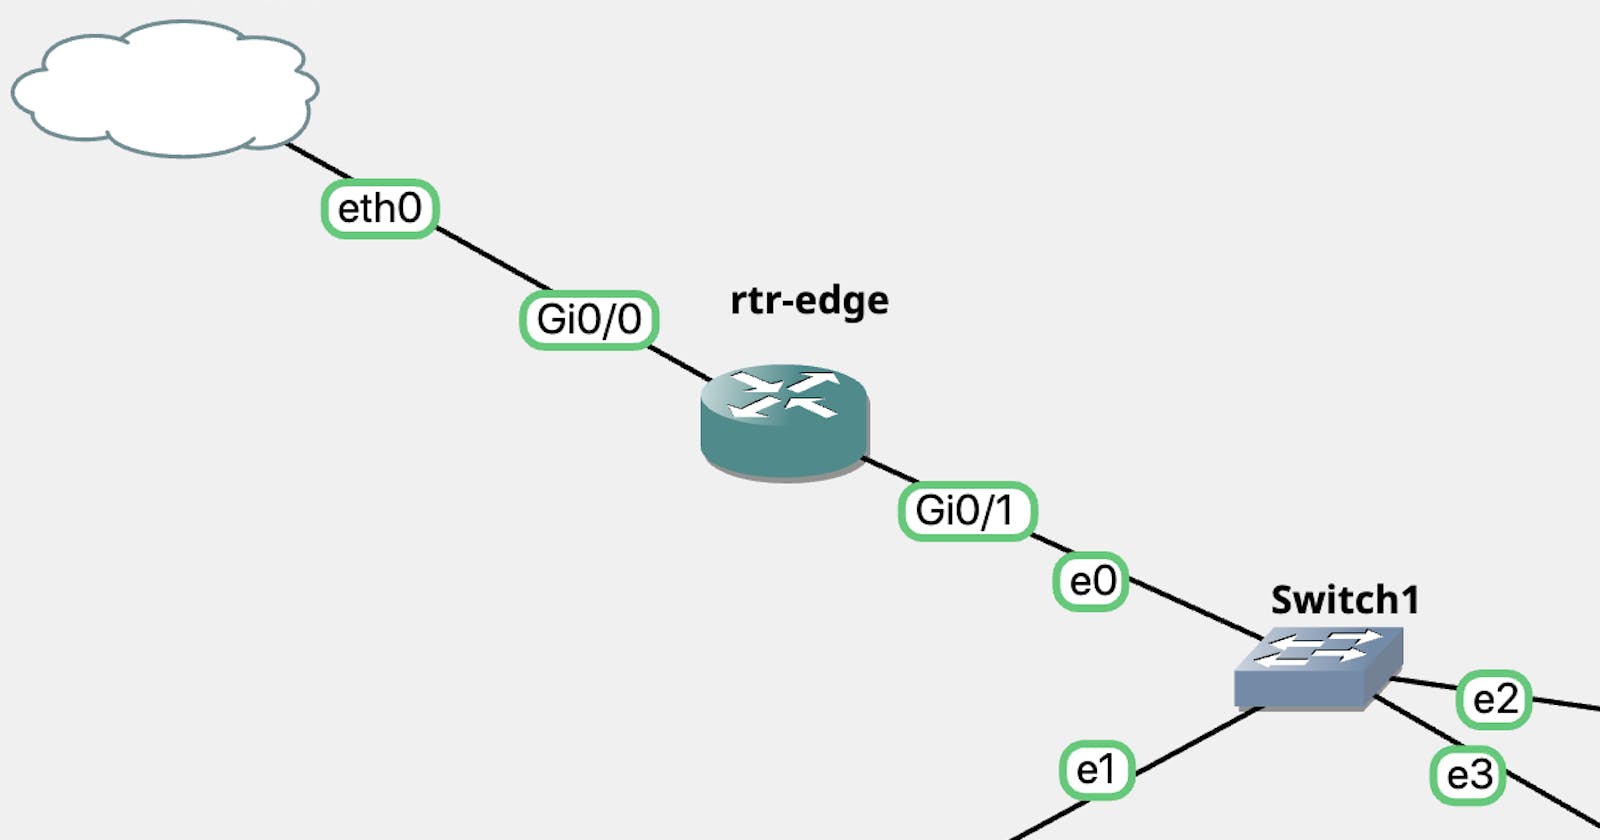 Practicing Network Automation with GNS3